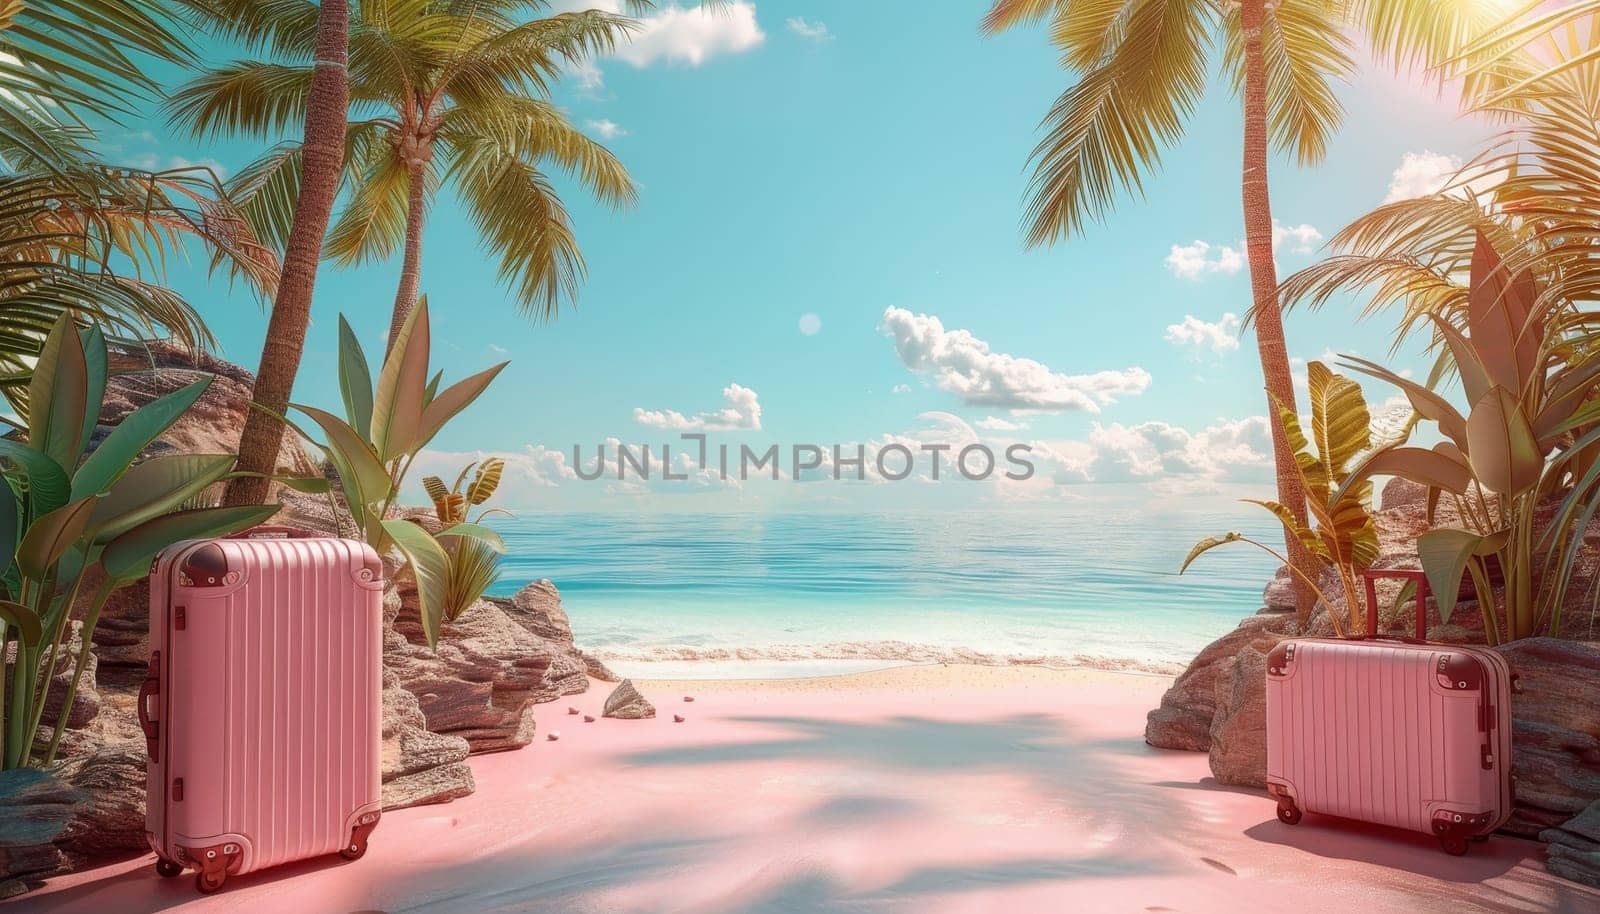 Two pink suitcases are on a beach, with palm trees in the background by AI generated image.